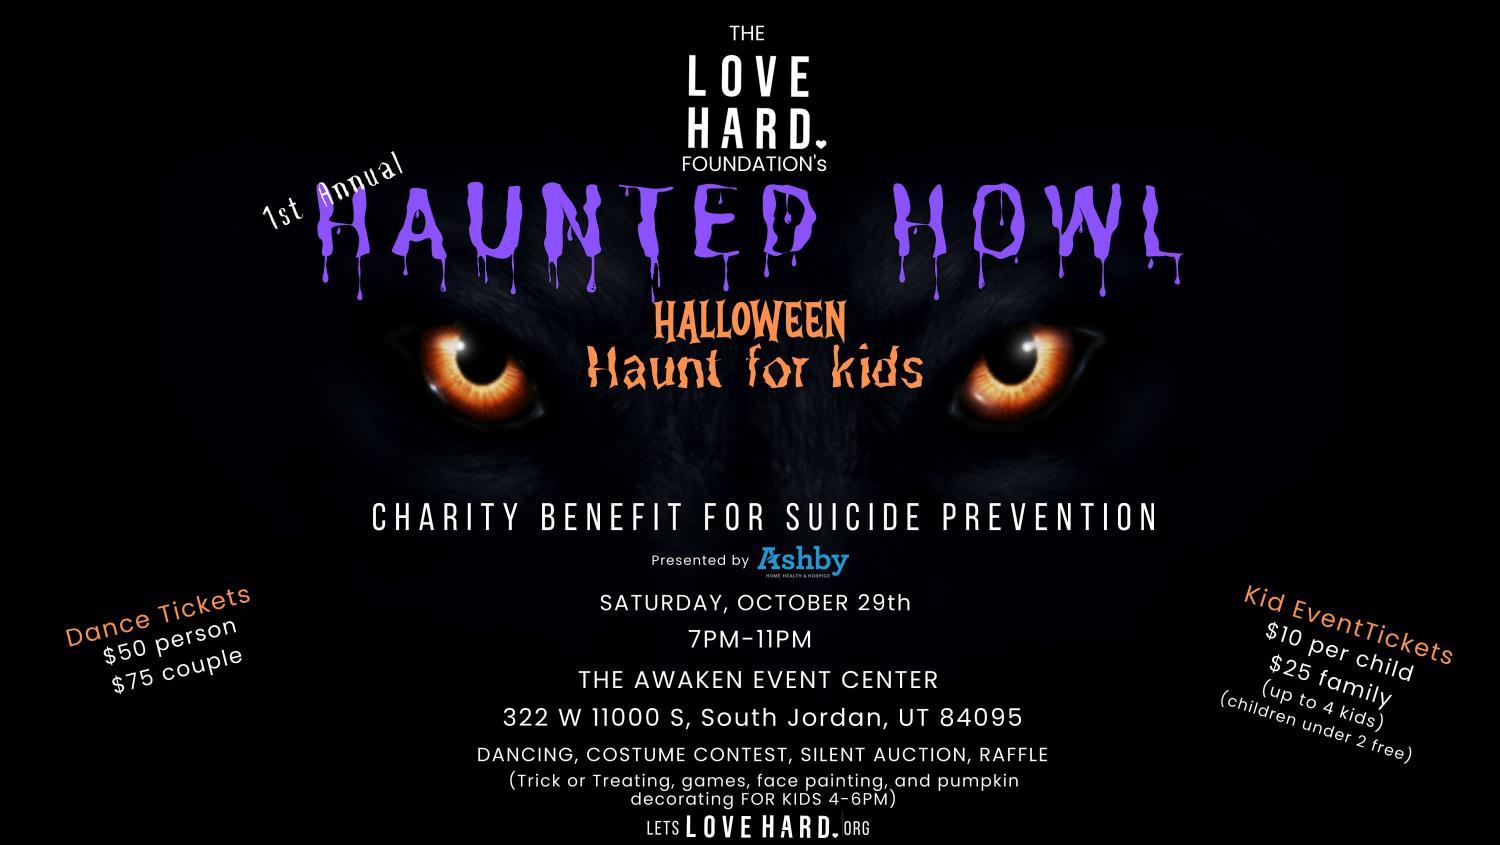 Love Hard`s First annual Haunted Howl Haunt for kids
Sat Oct 29, 4:00 PM - Sat Oct 29, 6:00 PM
in 9 days